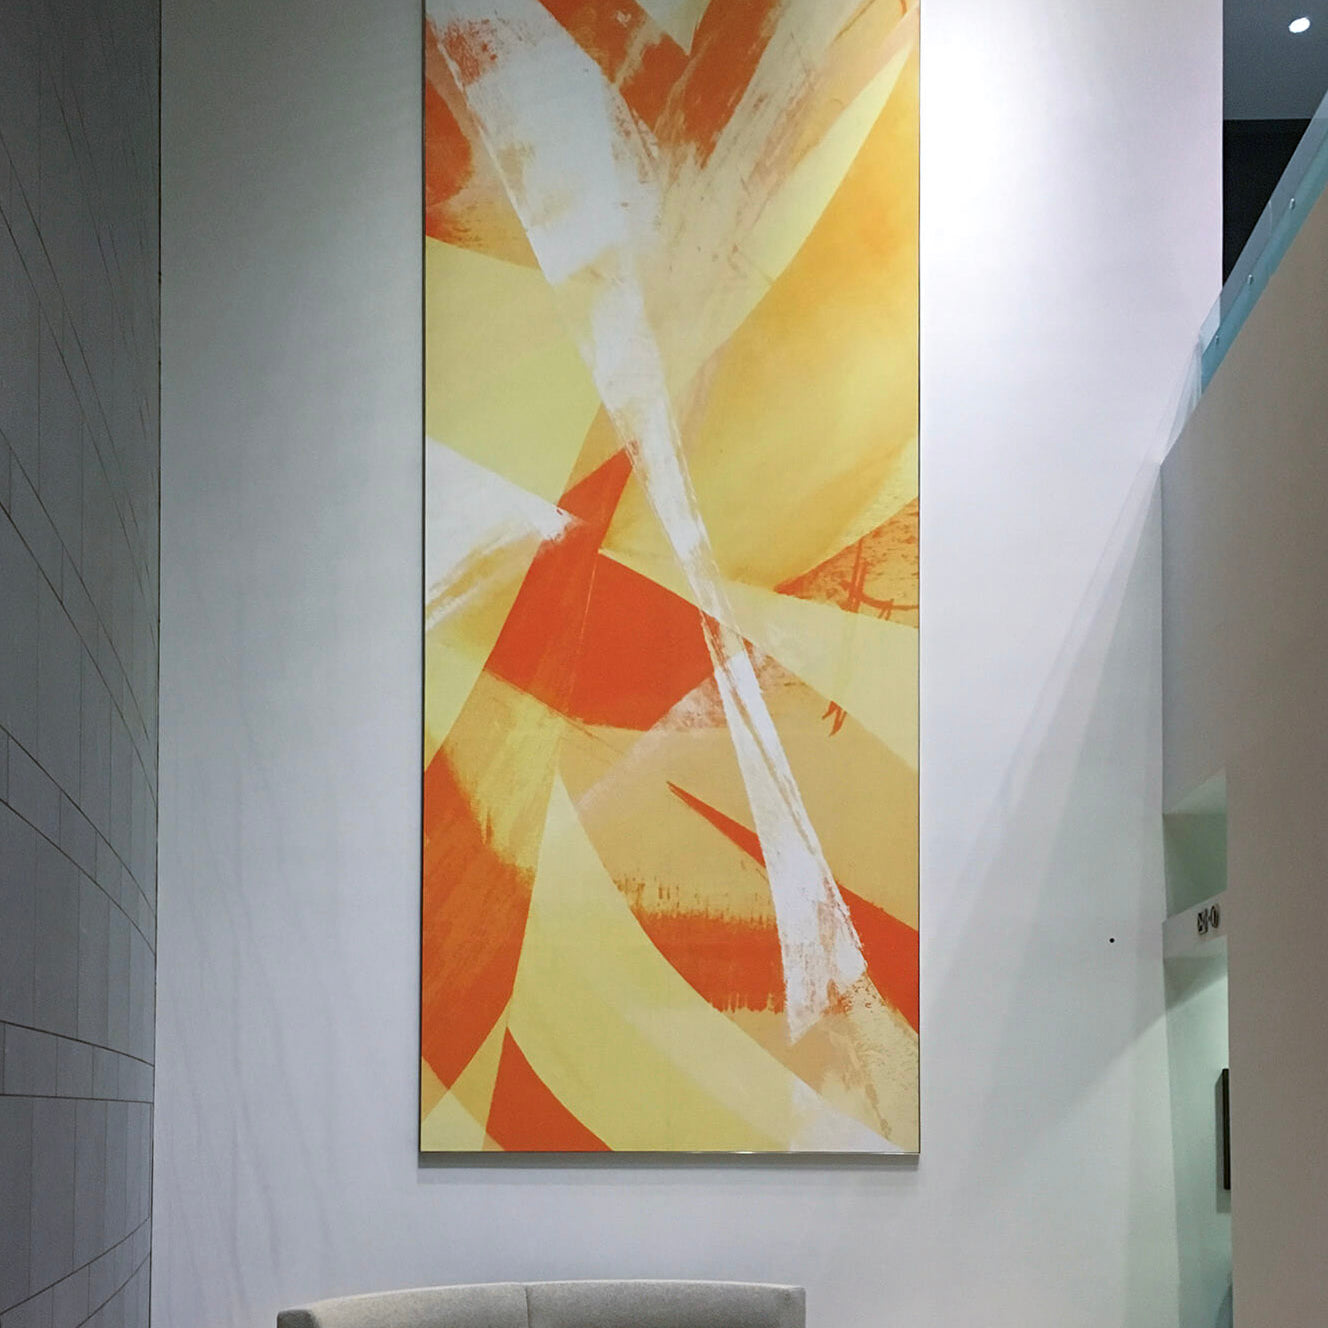 Spacious lobby at 71 South Wacker Drive adorned with a vibrant abstract painting from WRAPPED Studio.